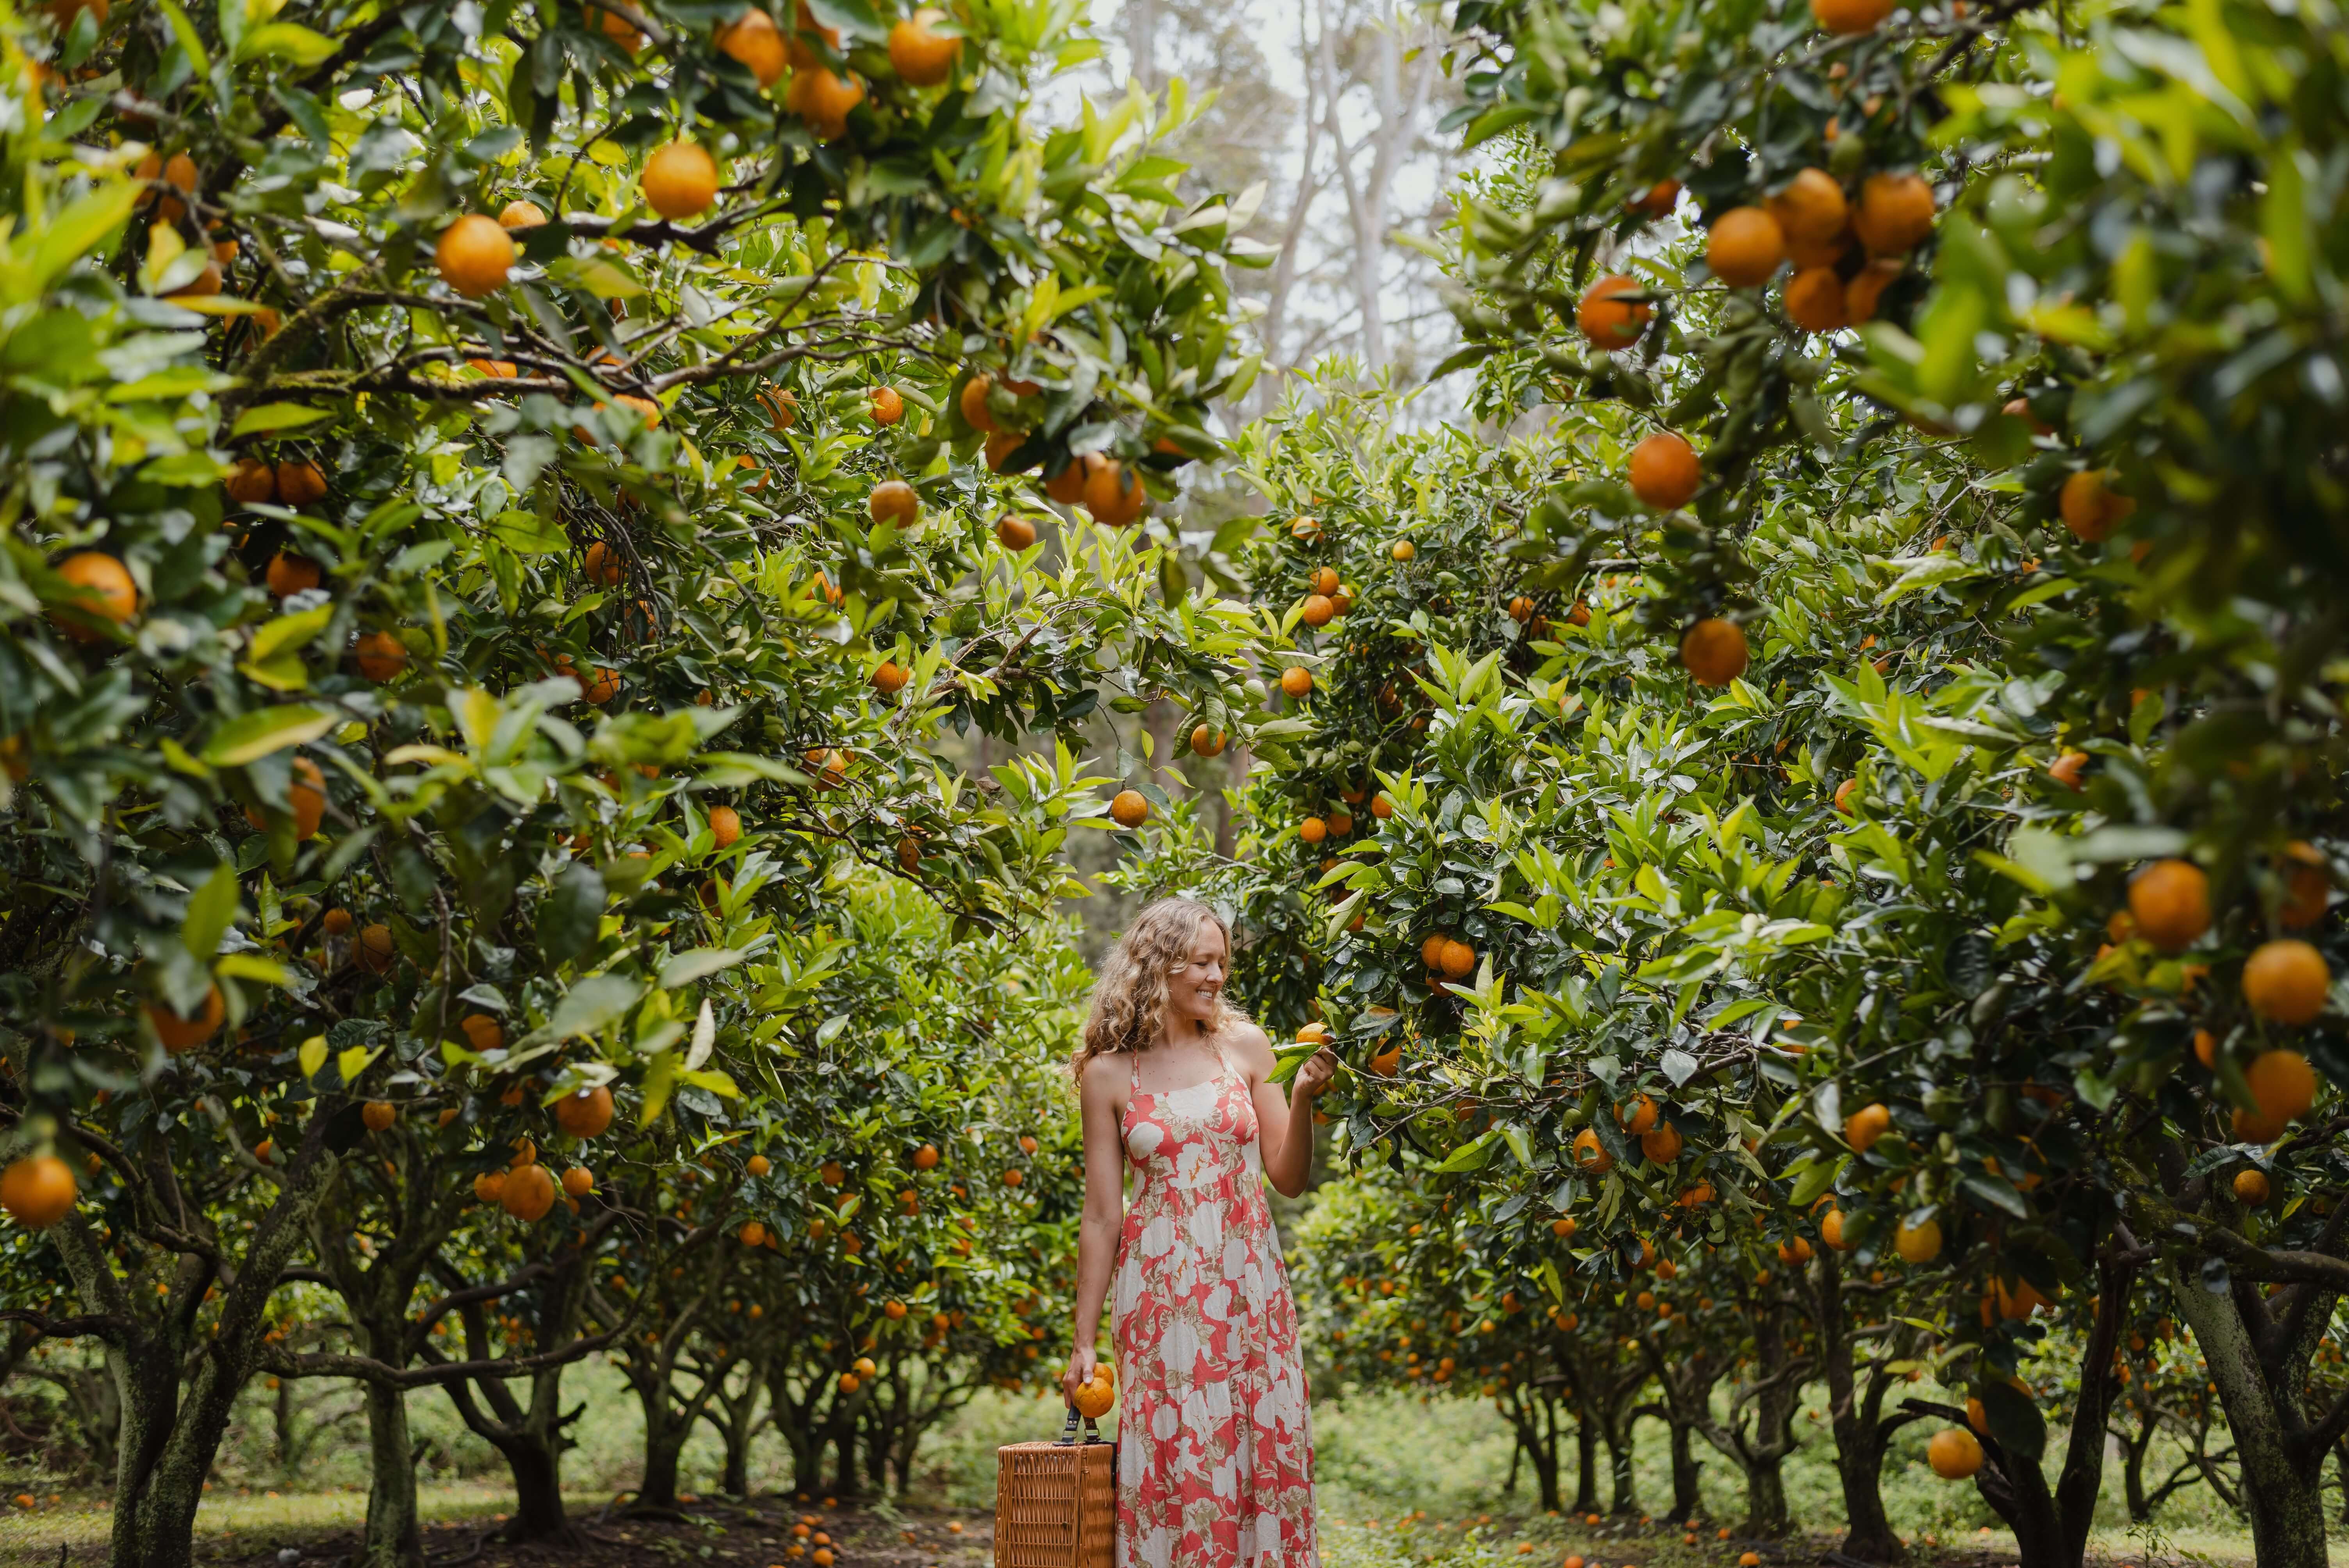 woman in orange orchard picking local produce